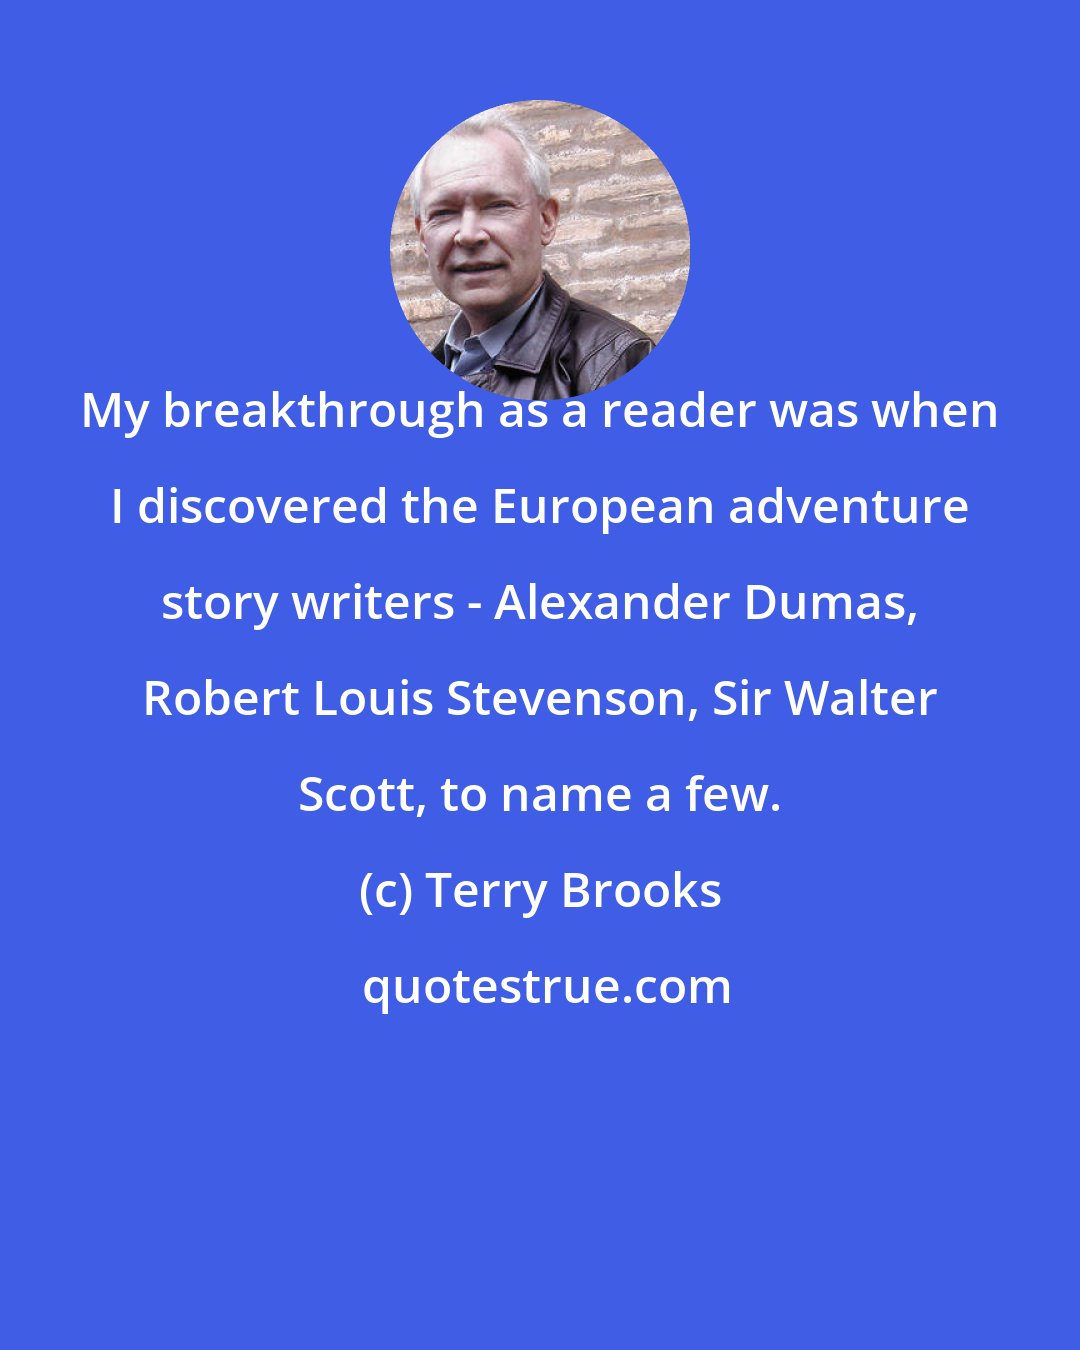 Terry Brooks: My breakthrough as a reader was when I discovered the European adventure story writers - Alexander Dumas, Robert Louis Stevenson, Sir Walter Scott, to name a few.